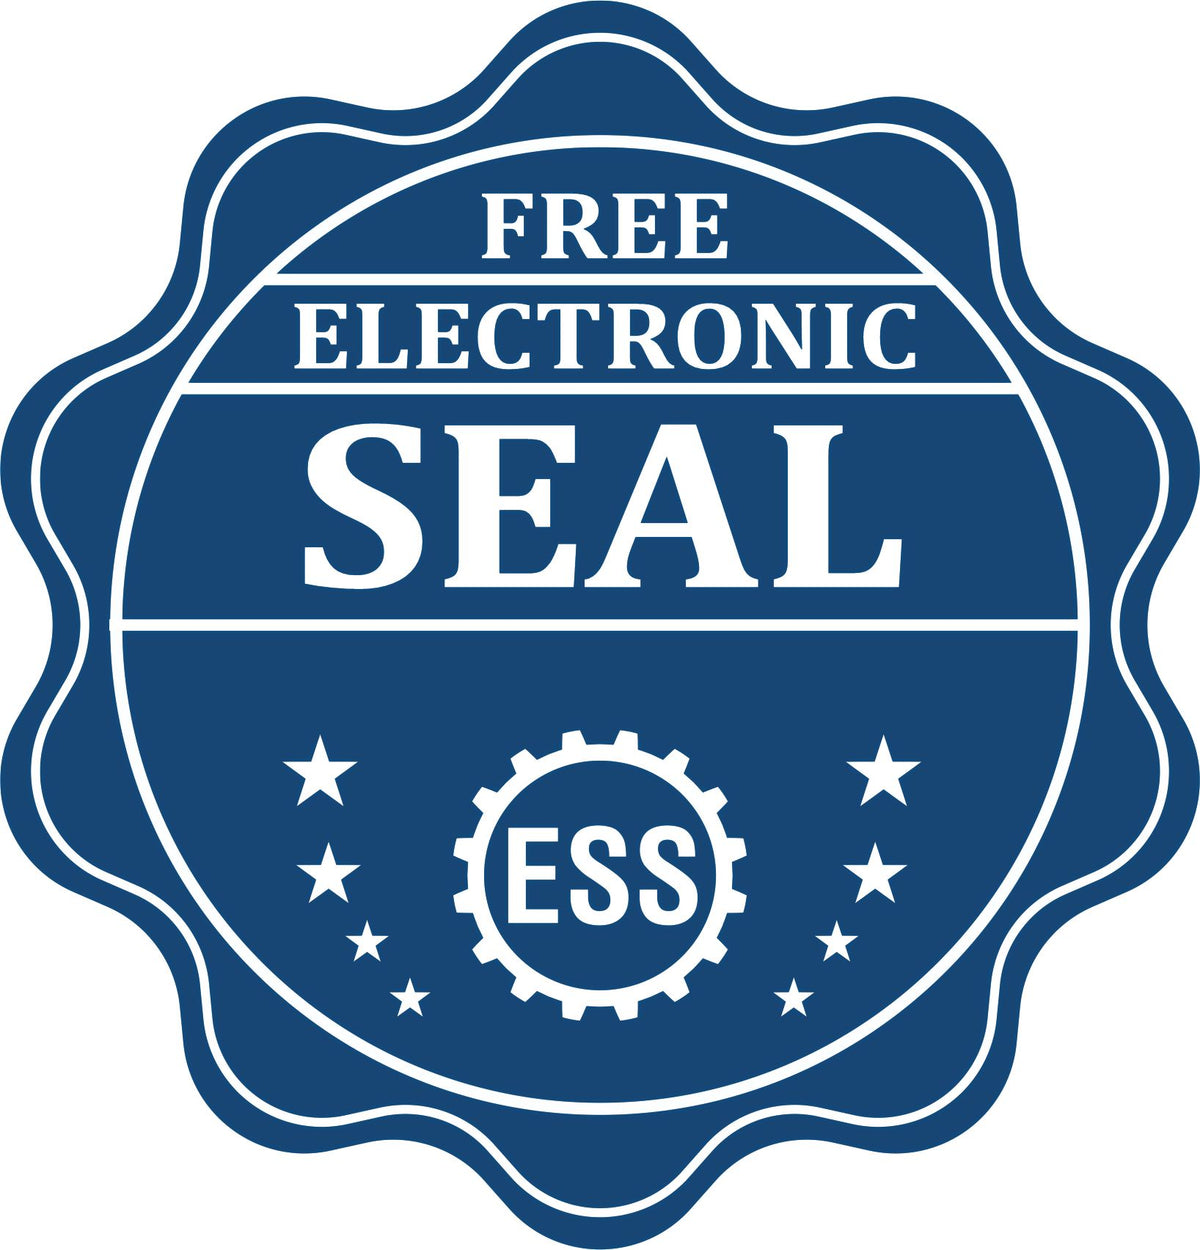 A badge showing a free electronic seal for the Premium MaxLight Pre-Inked New Hampshire Engineering Stamp with stars and the ESS gear on the emblem.